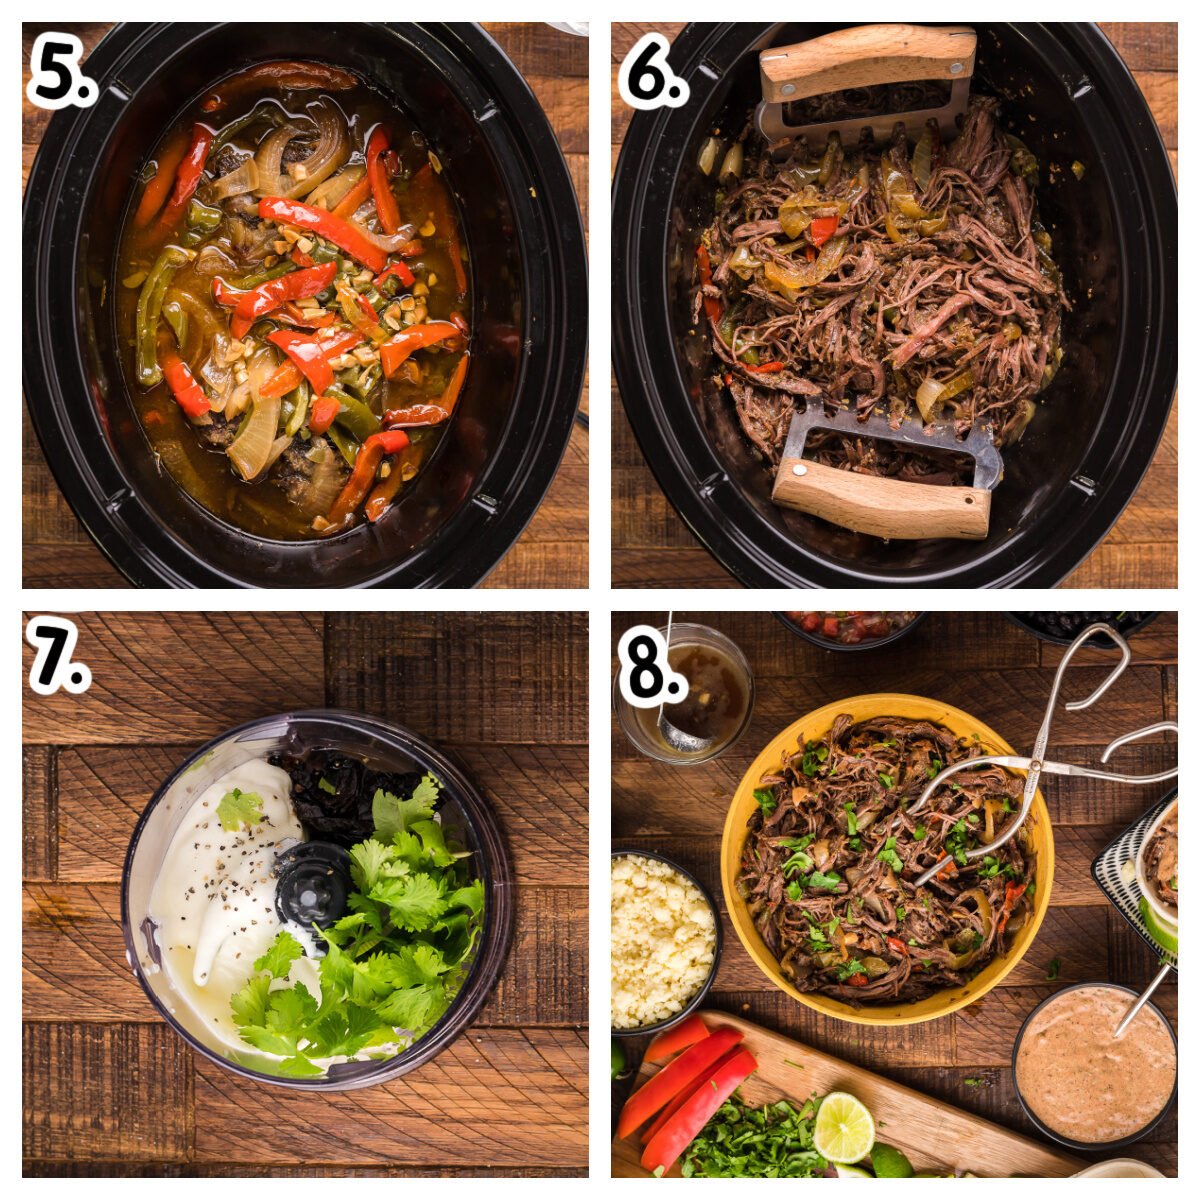 4 images about how to shred carne asada and make a crema sauce.